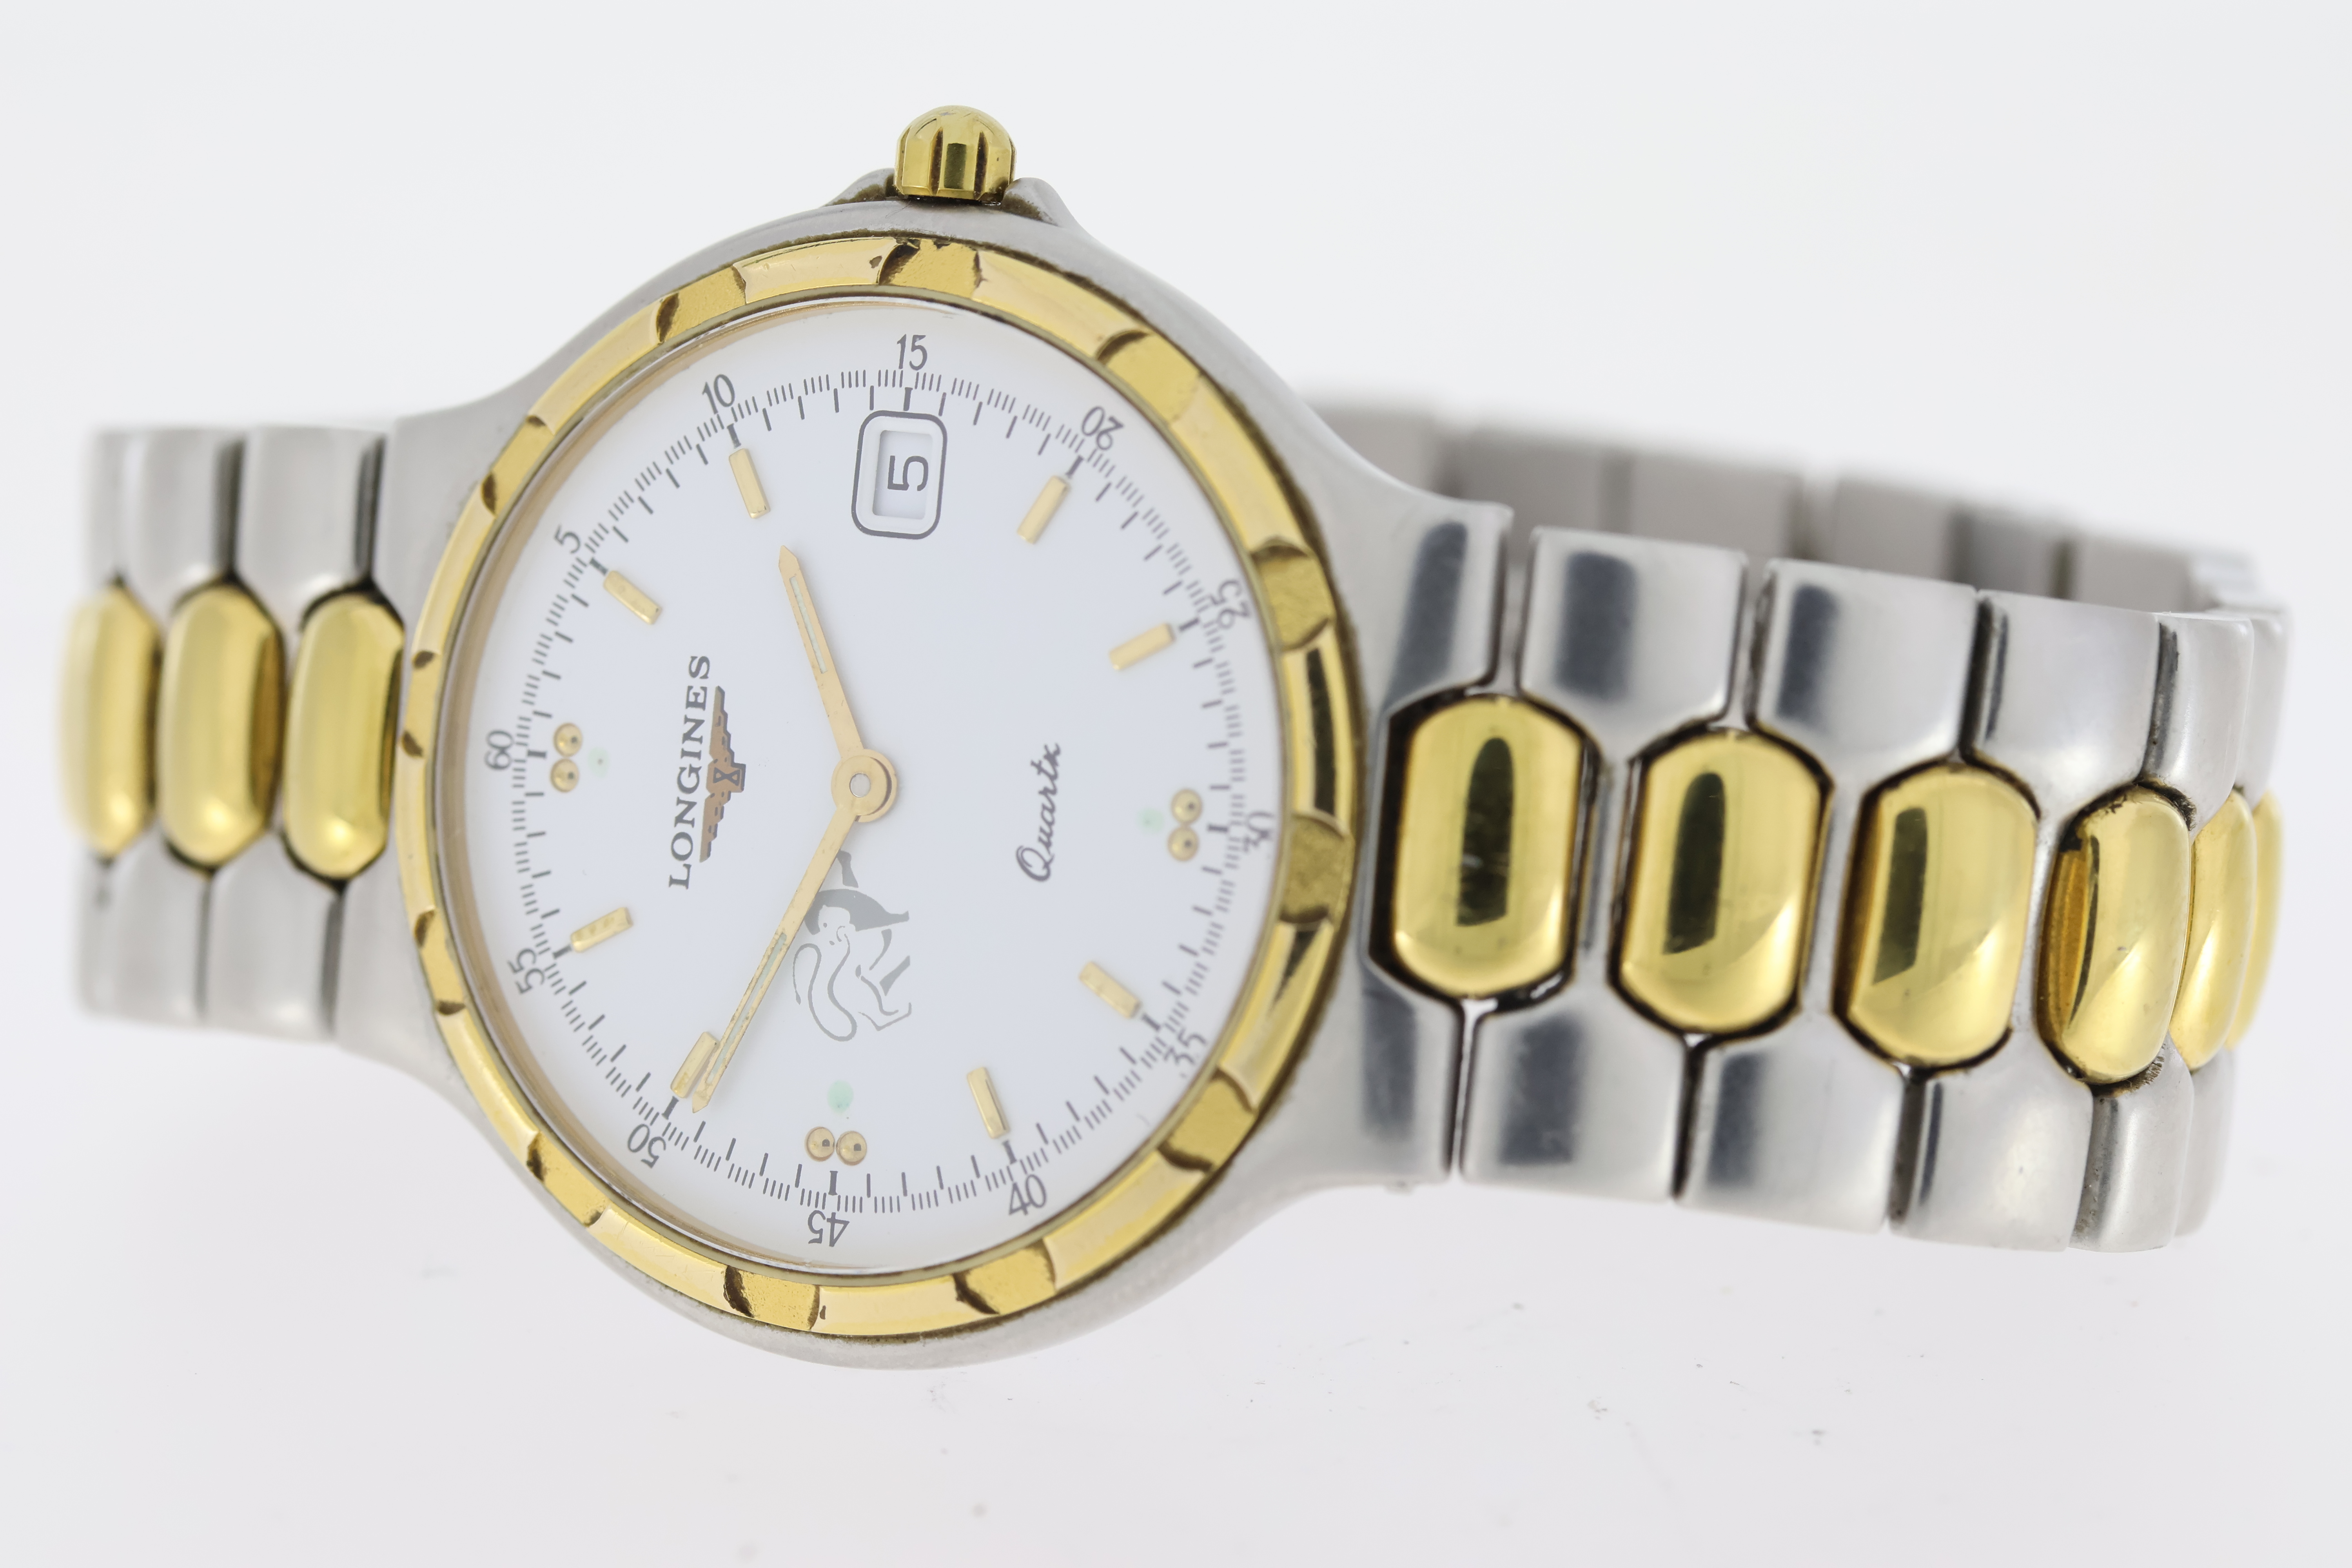 LONGINES CONQUEST REFERENCE L1614.3, white dial with Lion emblem, gold baton hour markers and hands, - Image 2 of 4